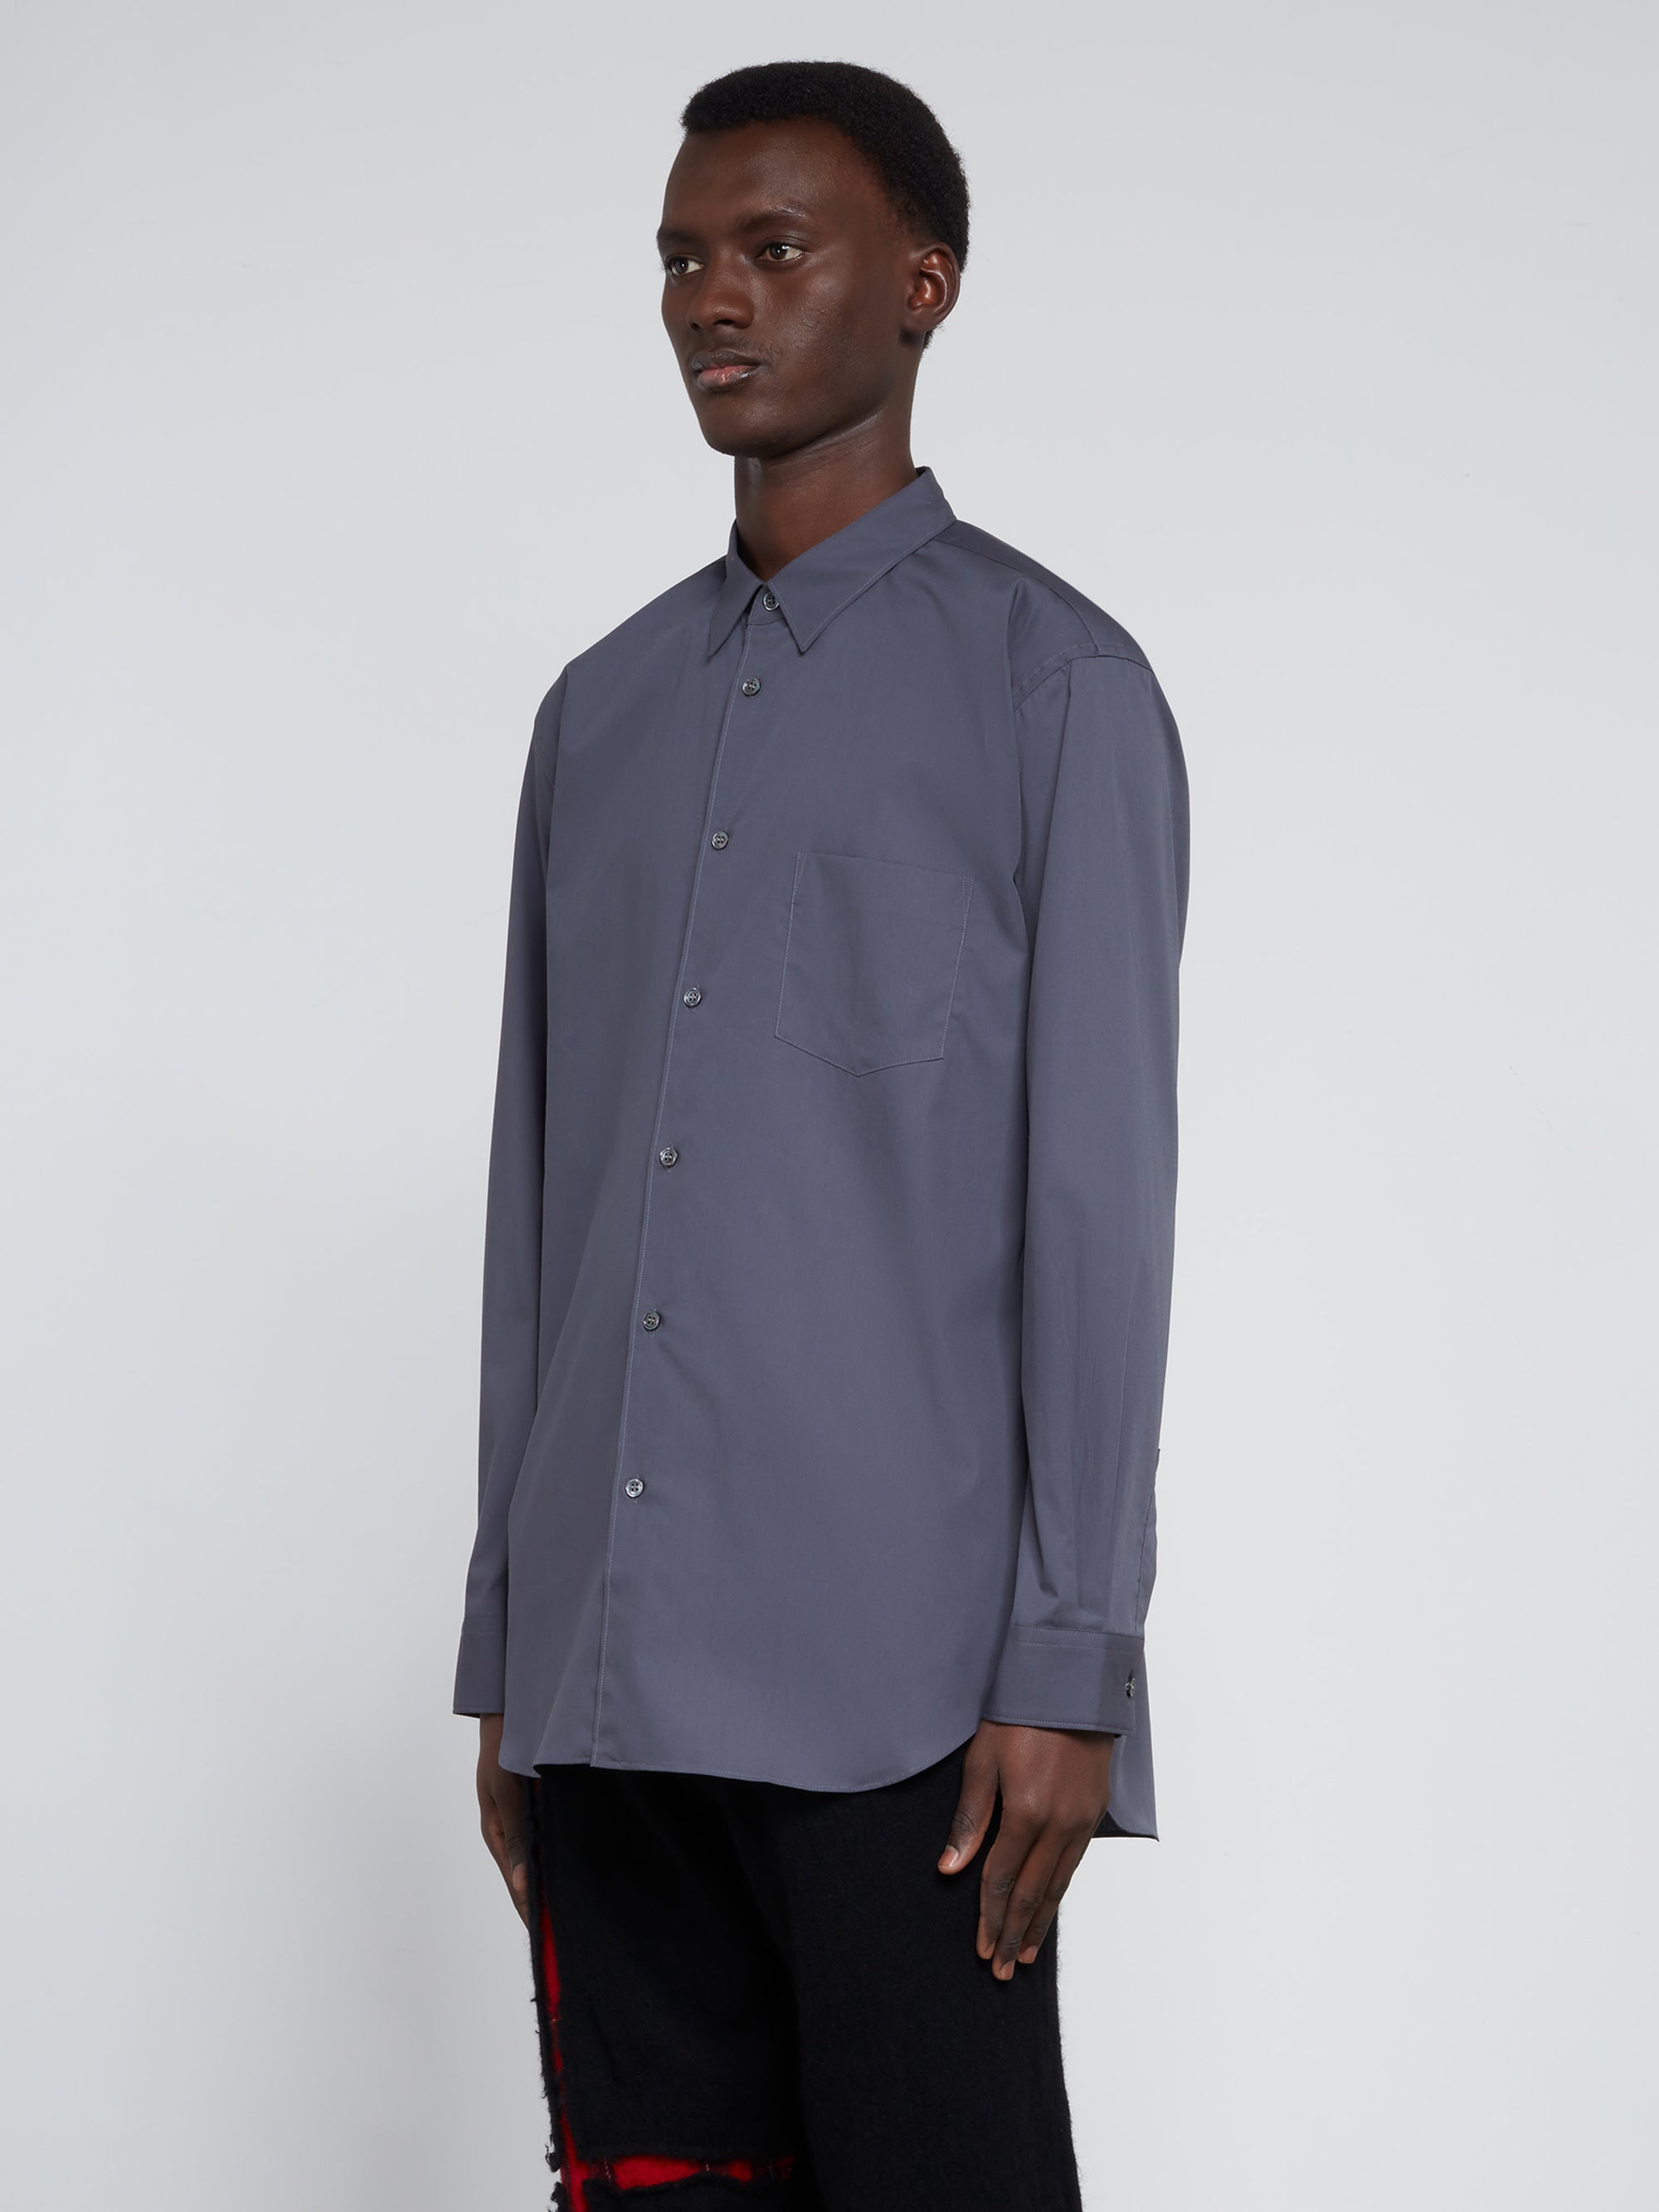 CDG Shirt Forever - Classic Fit Woven Cotton Shirt - (Grey) view 3